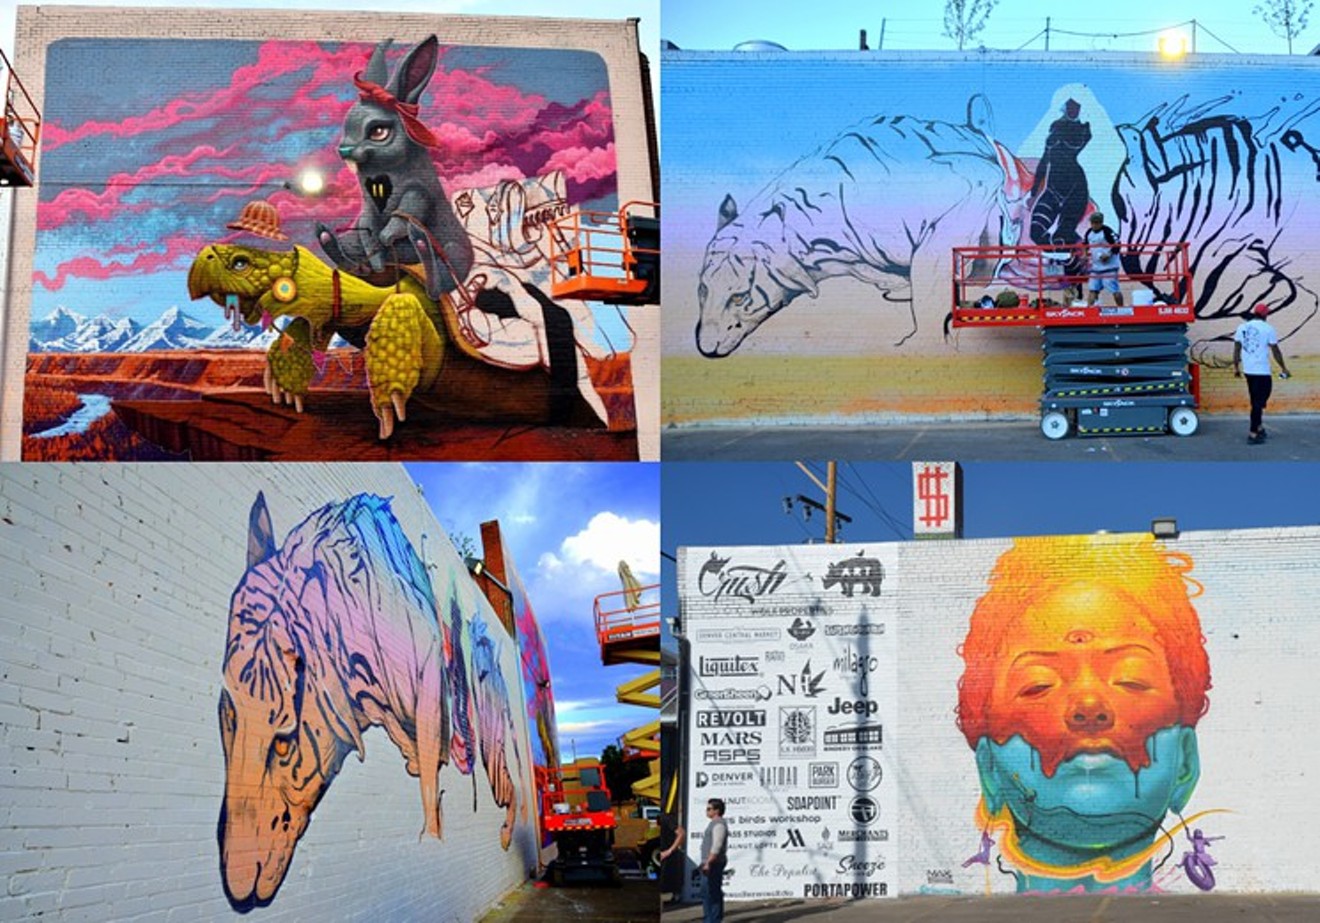 CRUSH murals by Dulk (upper left), two photos of the mural by Jose Mertz and Woes, and a piece by Max Sansing (lower right).